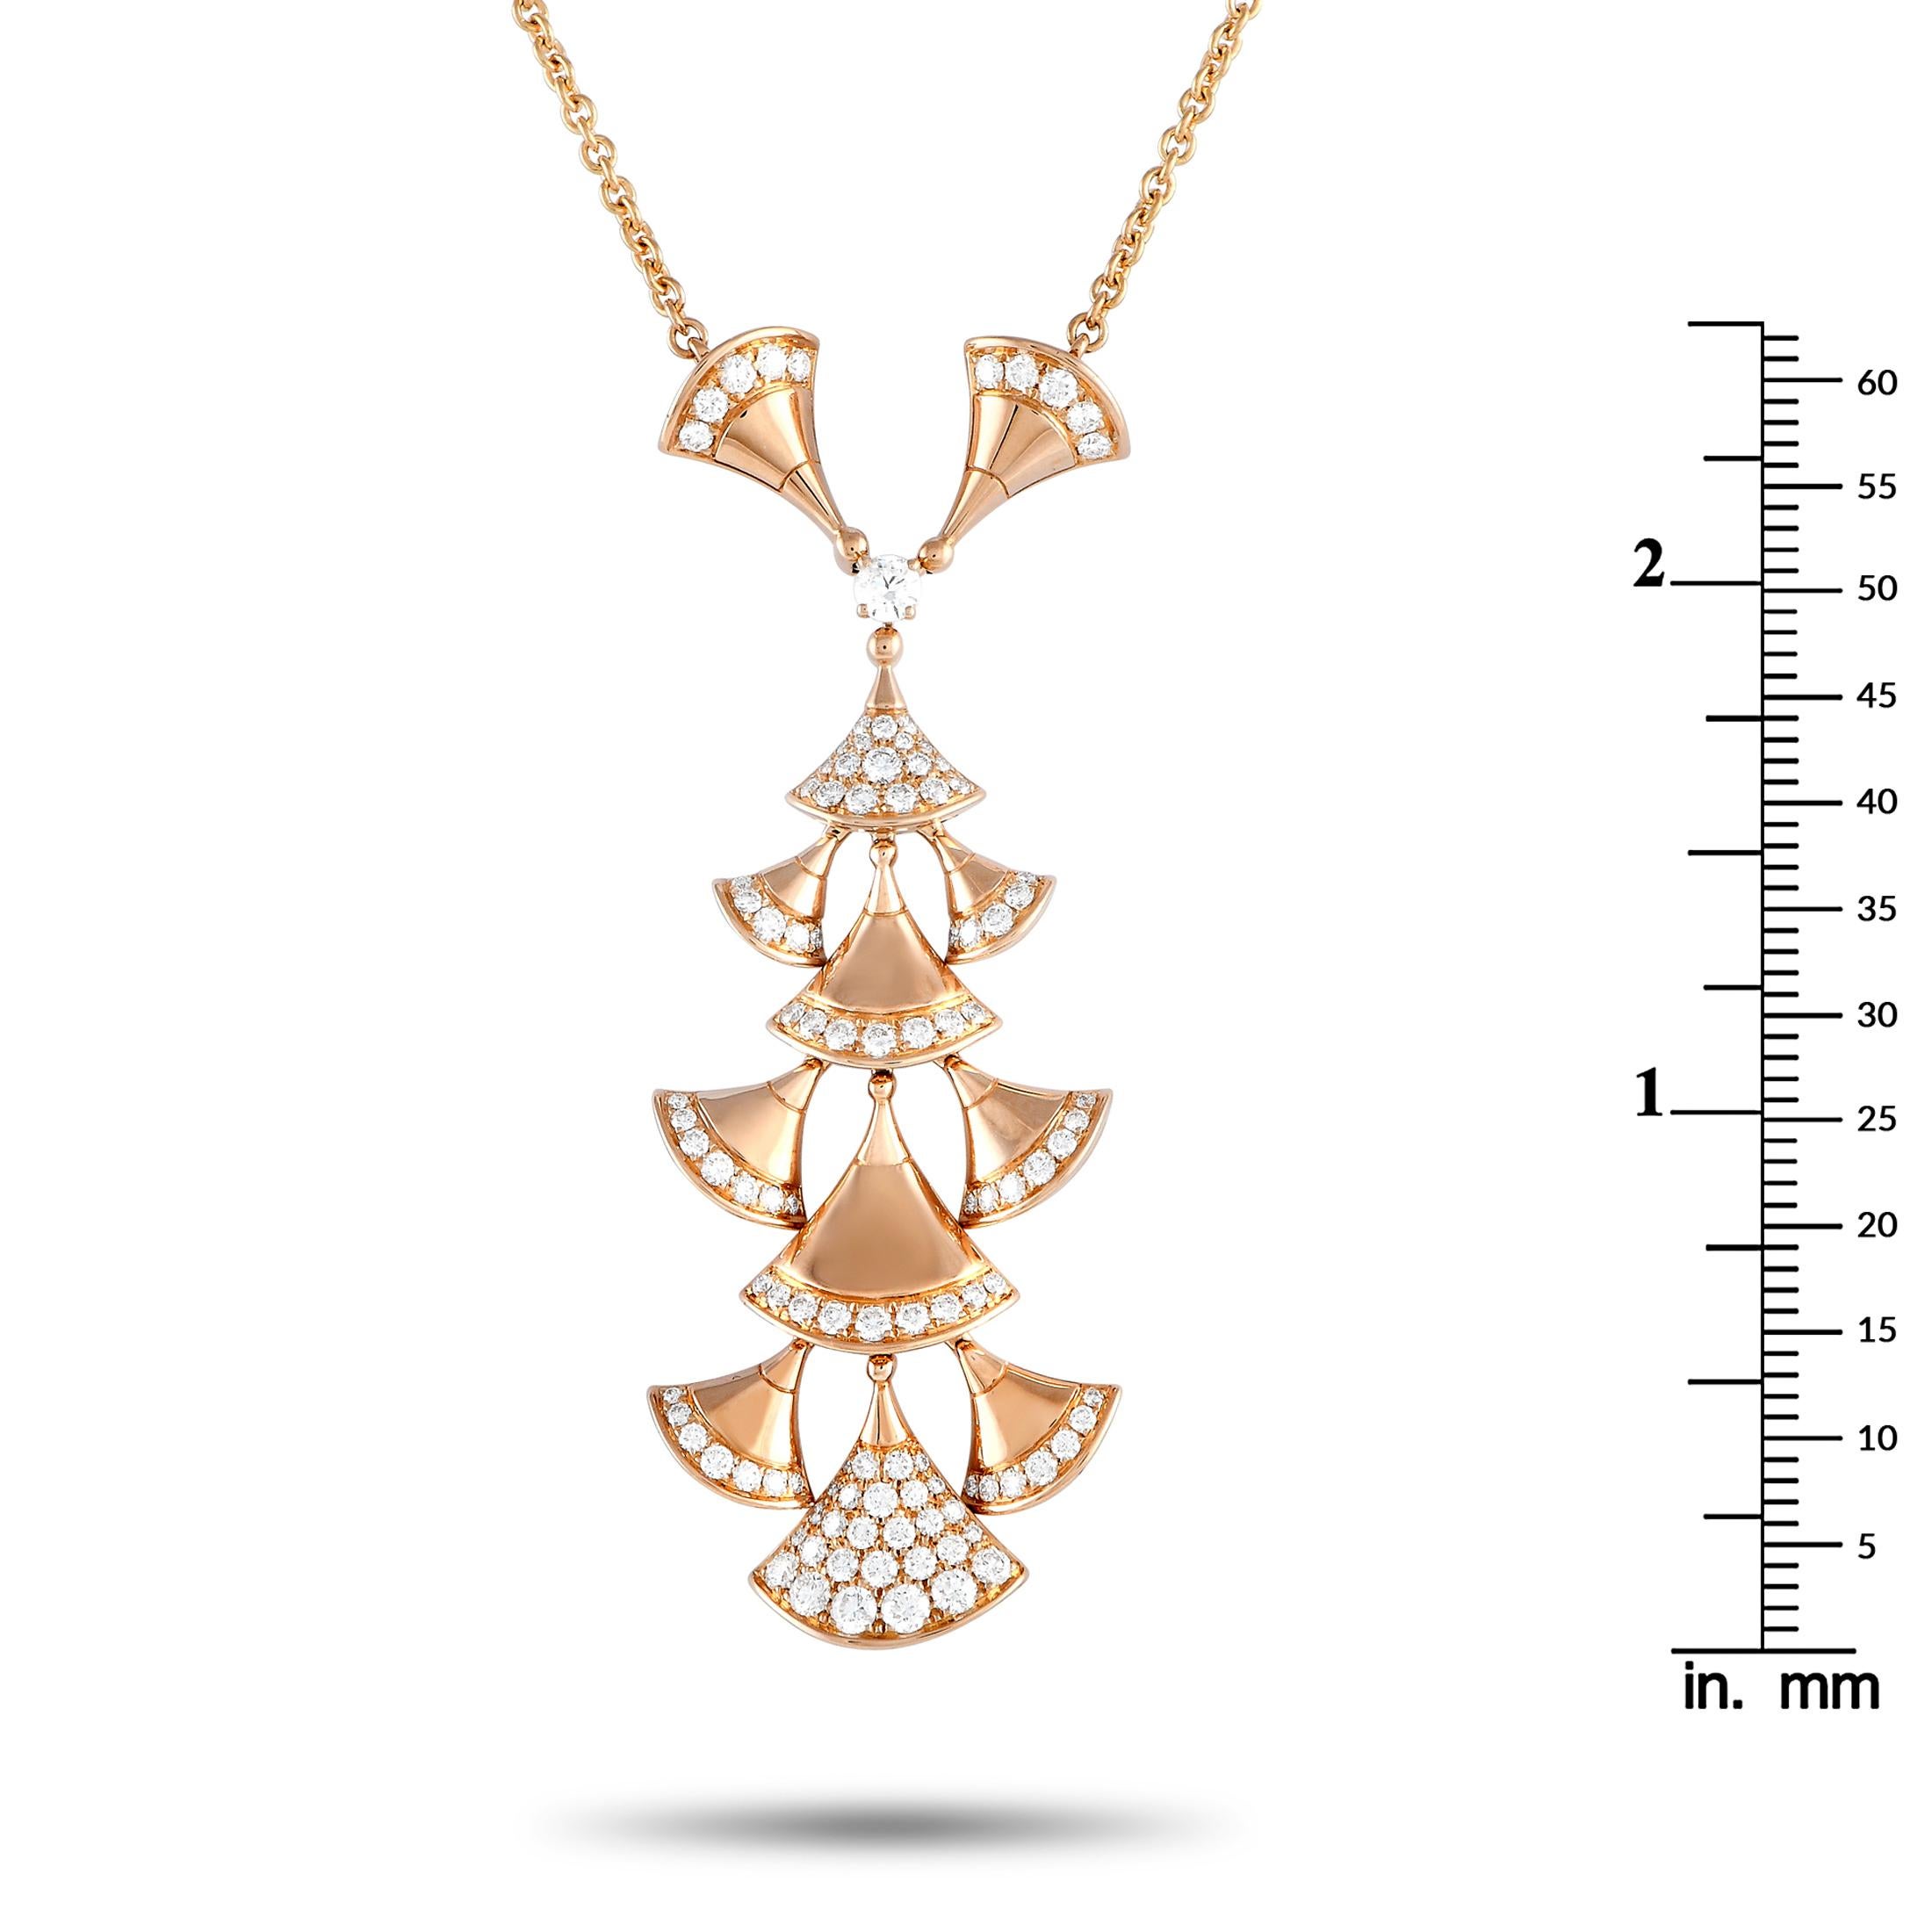 Bvlgari Diva's Dream 18K Rose Gold 1.70ct Diamond Necklace In Excellent Condition For Sale In Southampton, PA